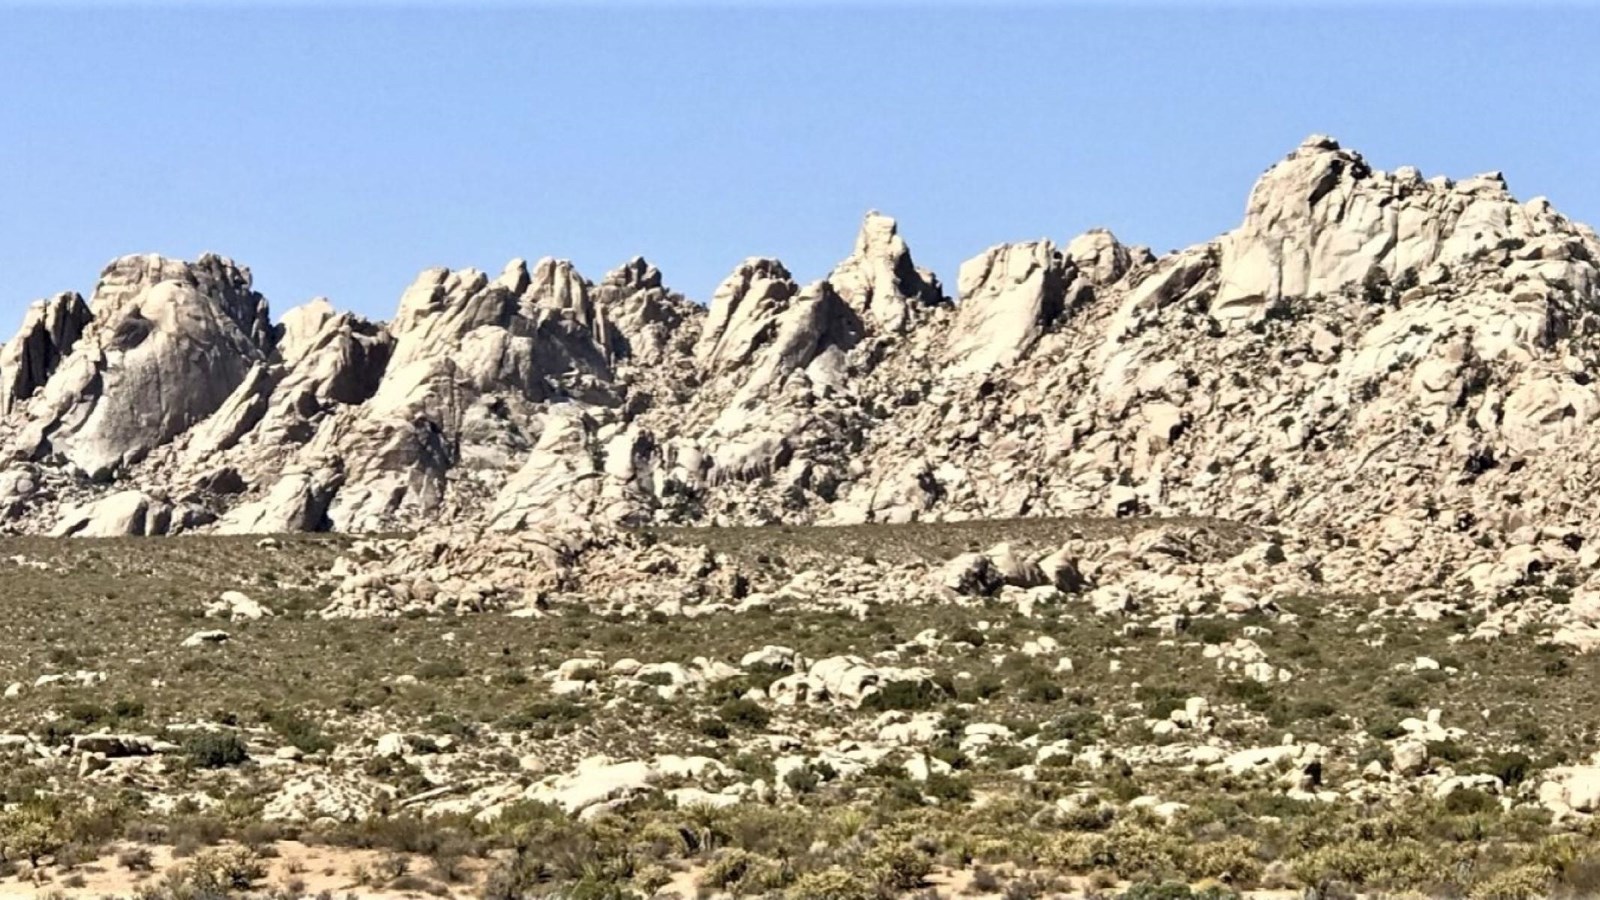 The rocky peaks of the Granite Mountains with a clear sky.  Creosote in the foreground.